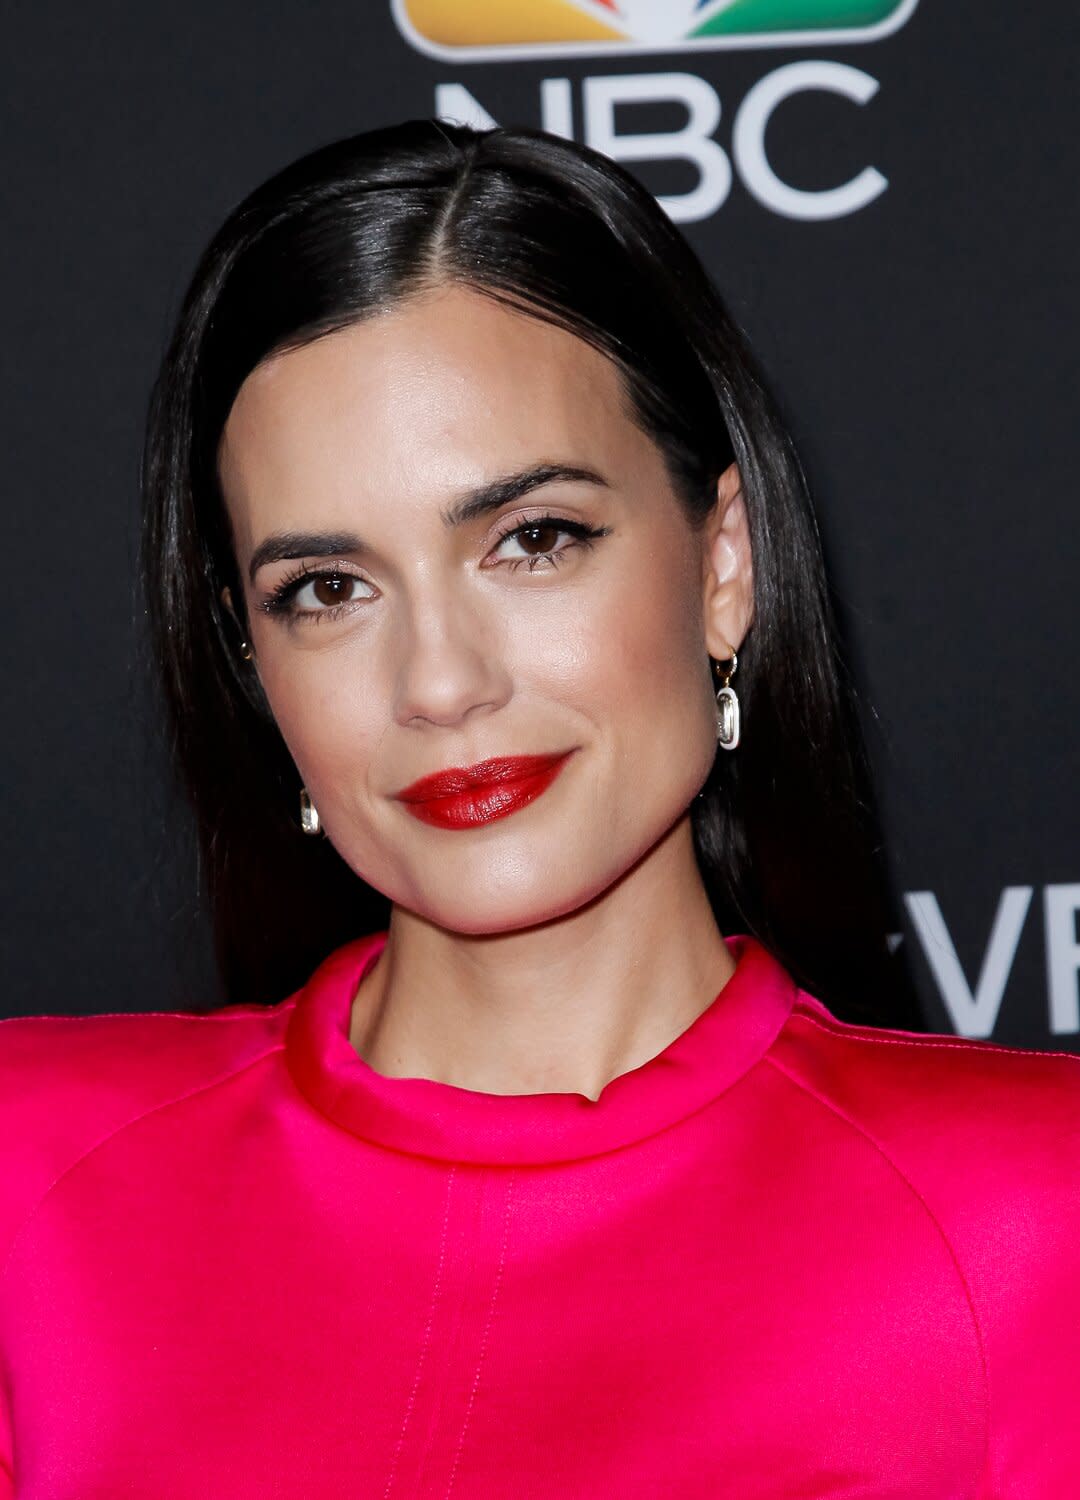 Torrey DeVitto attends NBC and Vanity Fair's celebration of the season at The Henry on November 11, 2019 in Los Angeles, California.